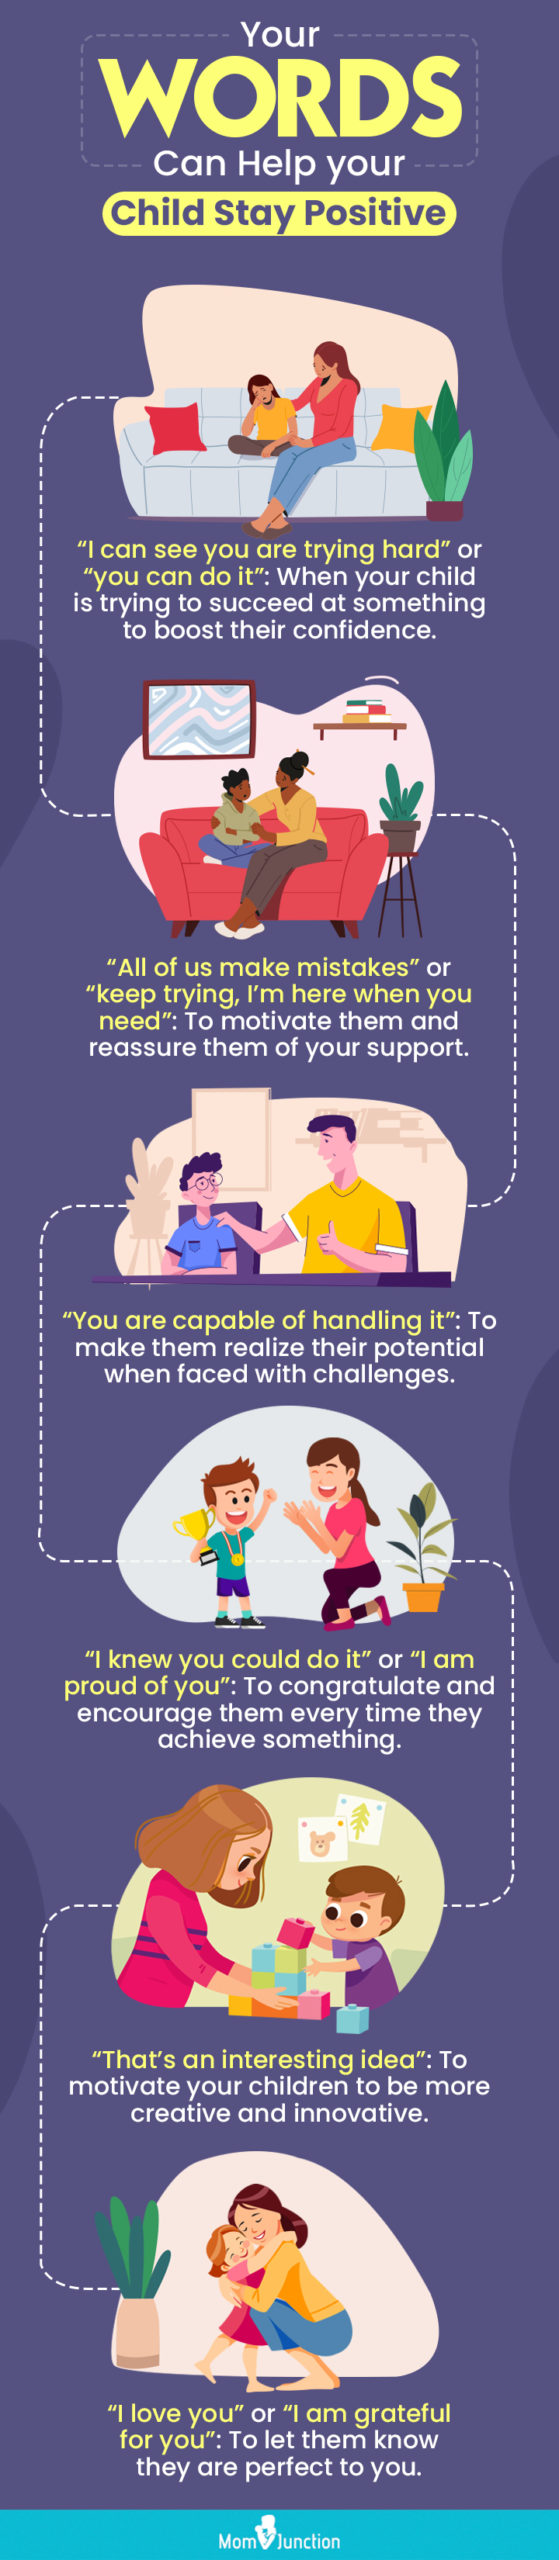 your words can help your child stay positive (infographic)